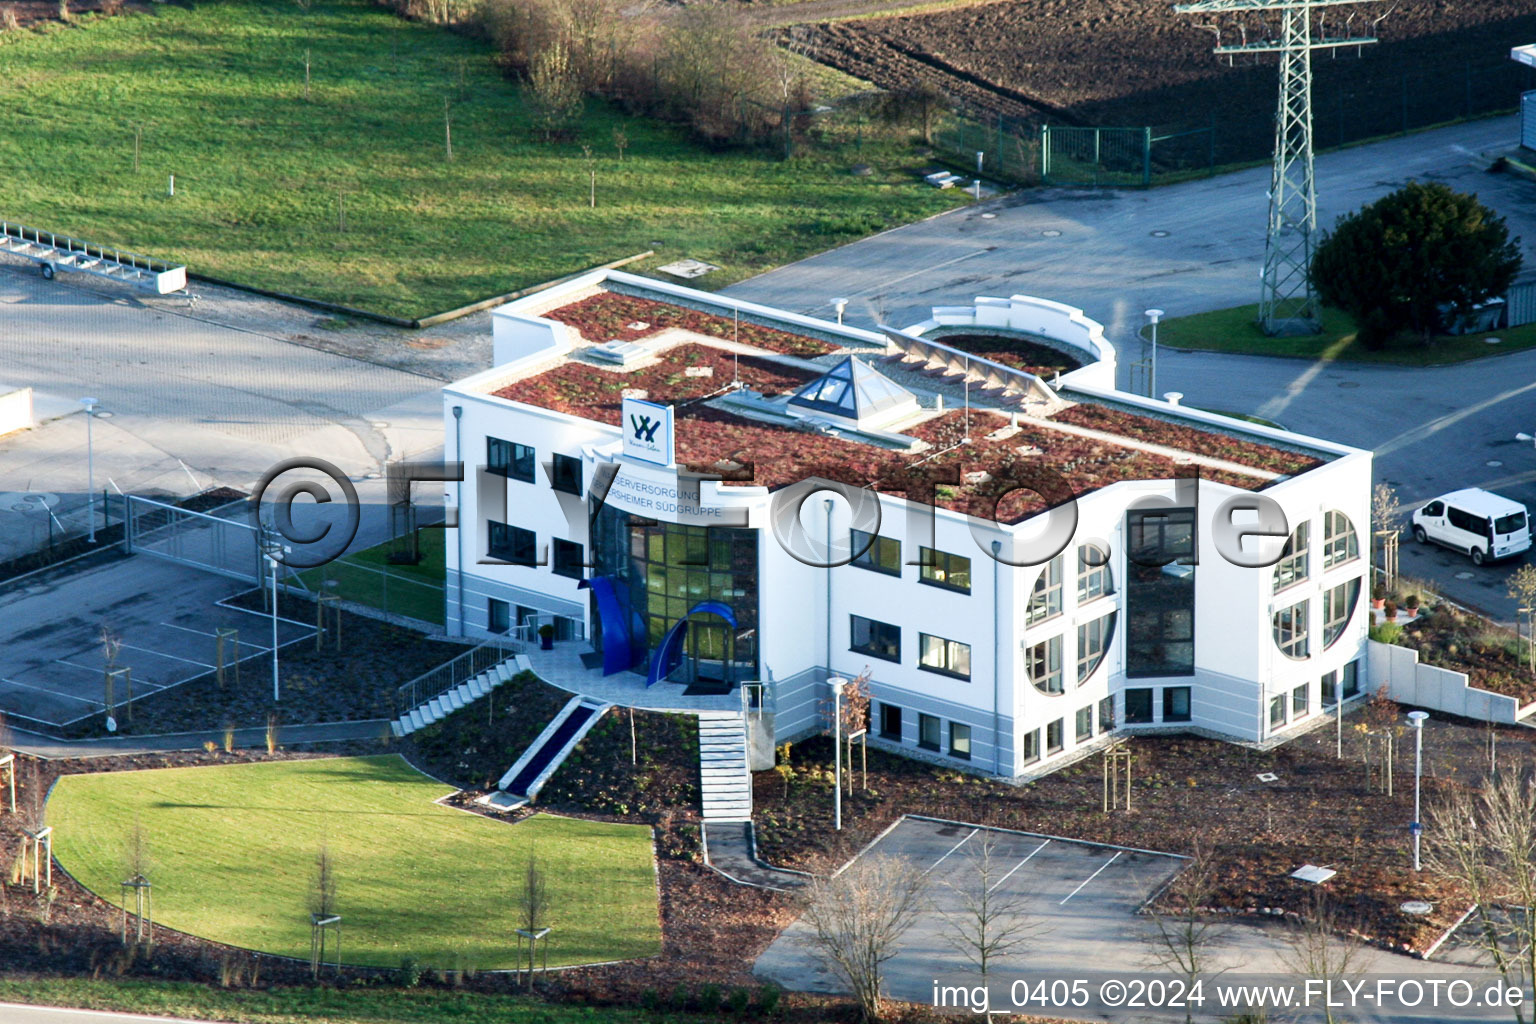 Administrative building of the State Authority for Water supply in Jockgrim in the state Rhineland-Palatinate